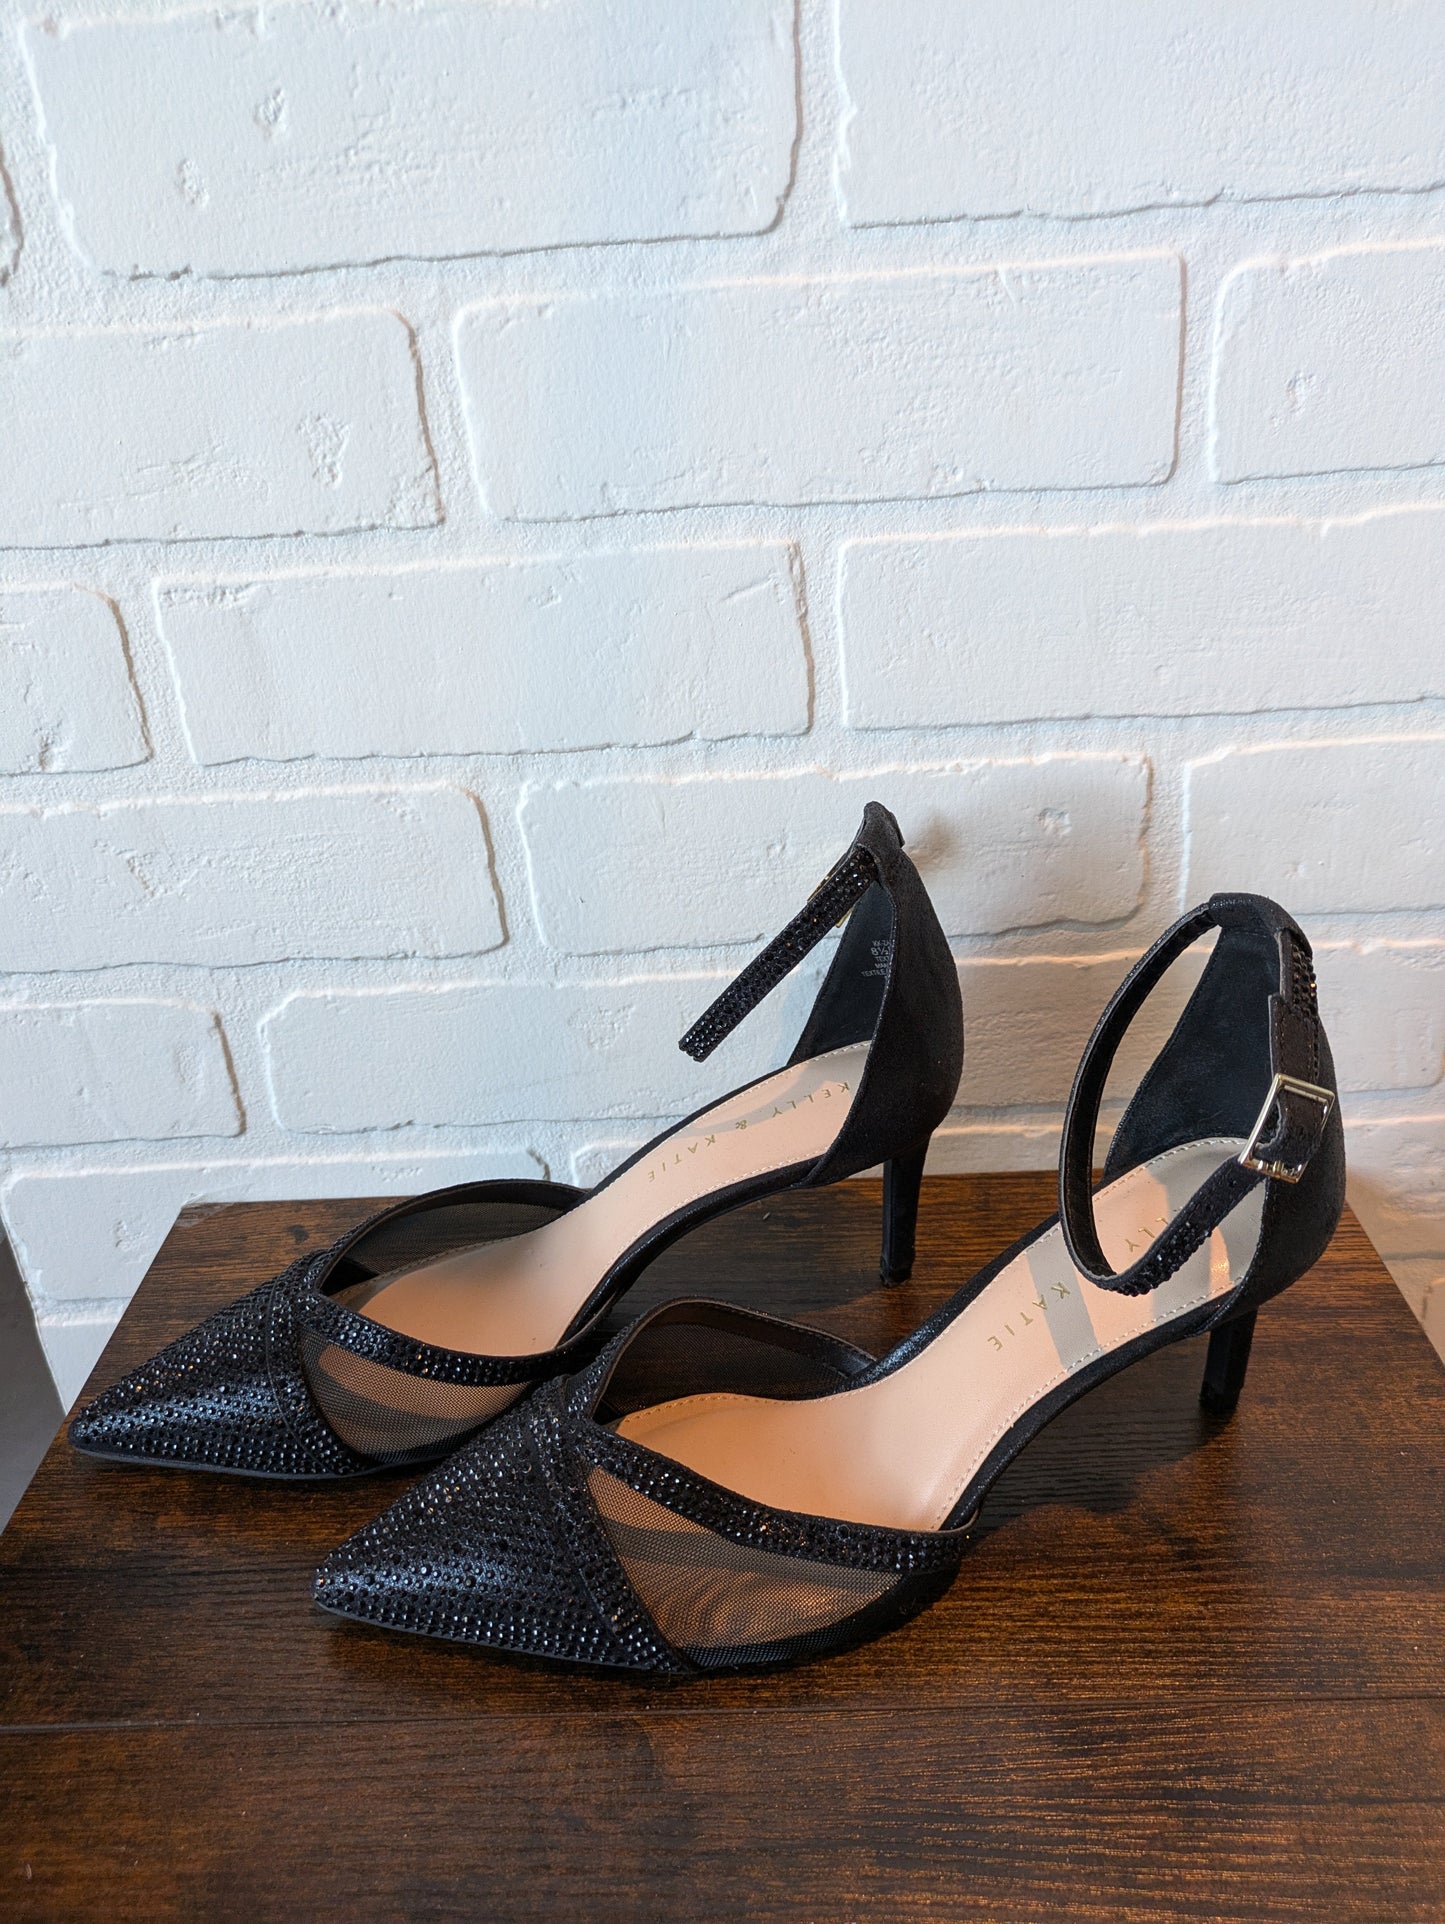 Black Shoes Heels Stiletto Kelly And Katie, Size 8.5